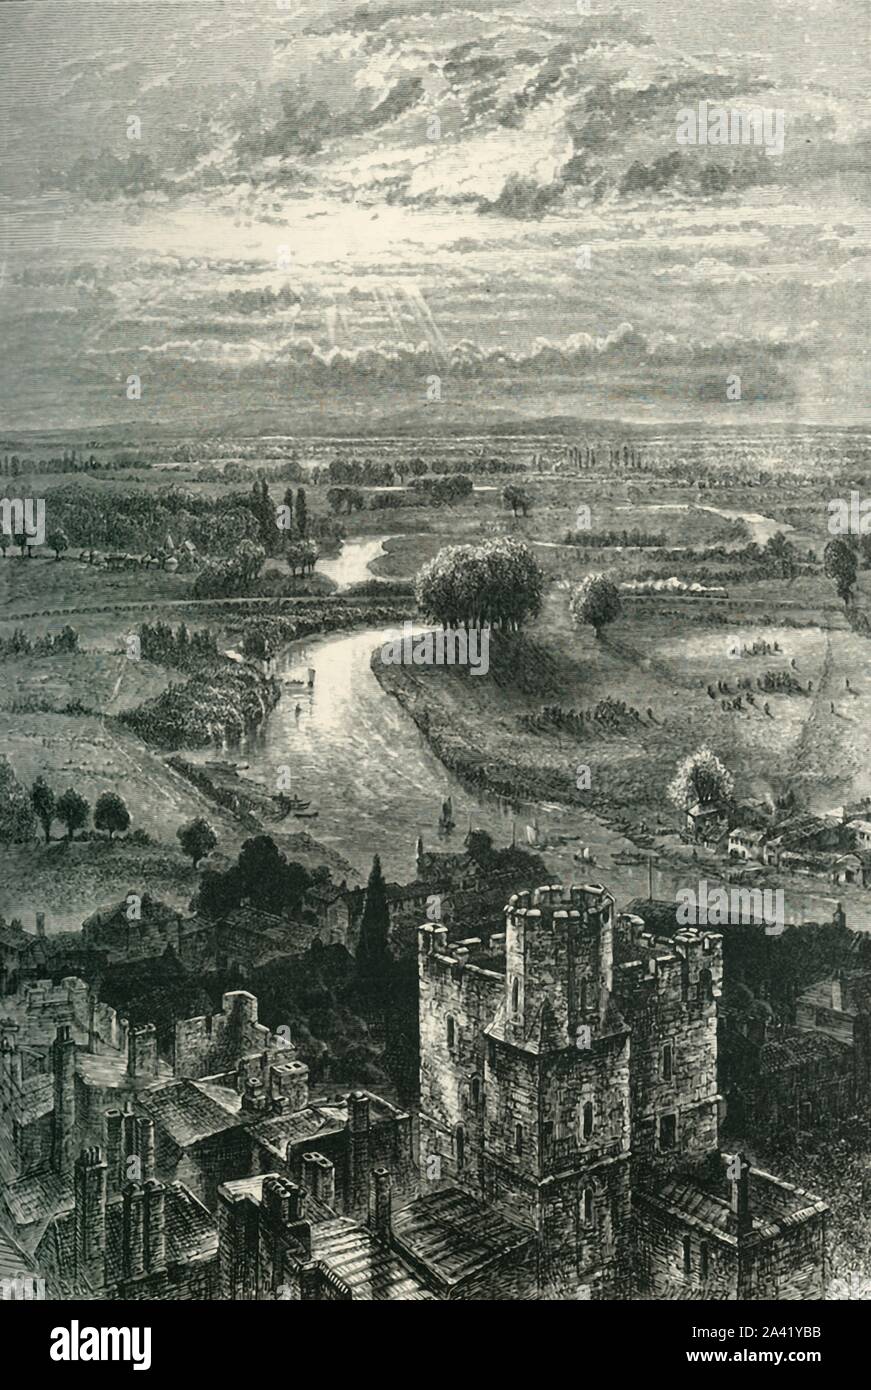 &amp;#39;The Thames Valley, from the Round Tower&amp;#39;, c1870. The Round Tower at ...